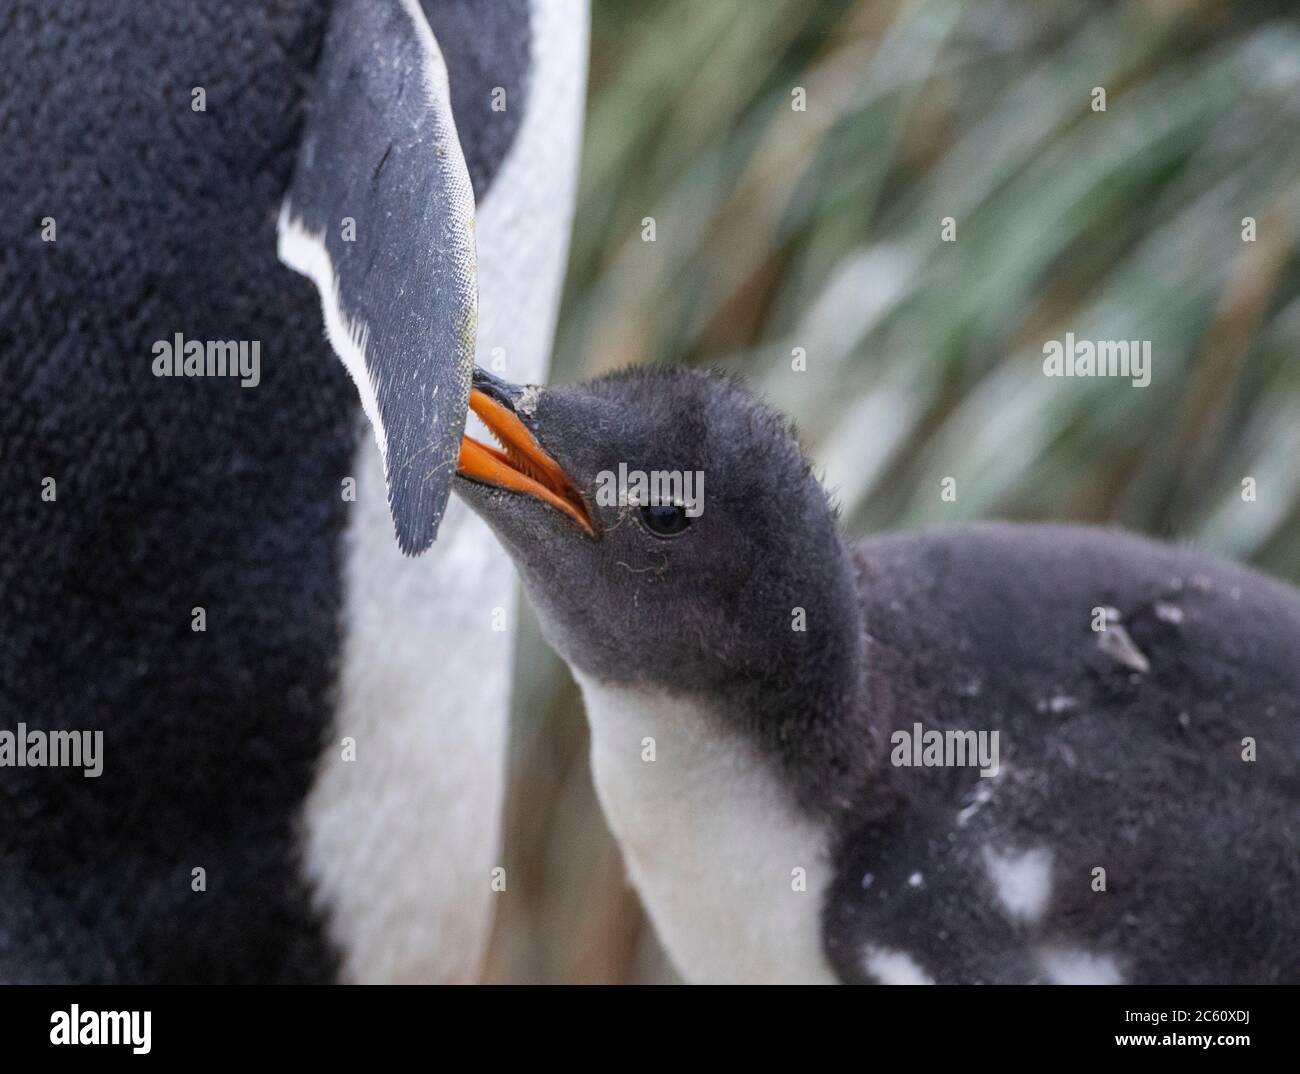 Gentoo Penguin (Pygoscelis papua papua) at research station Buckles bay on Macquarie Island, Australia. Begging young with its parent. Stock Photo